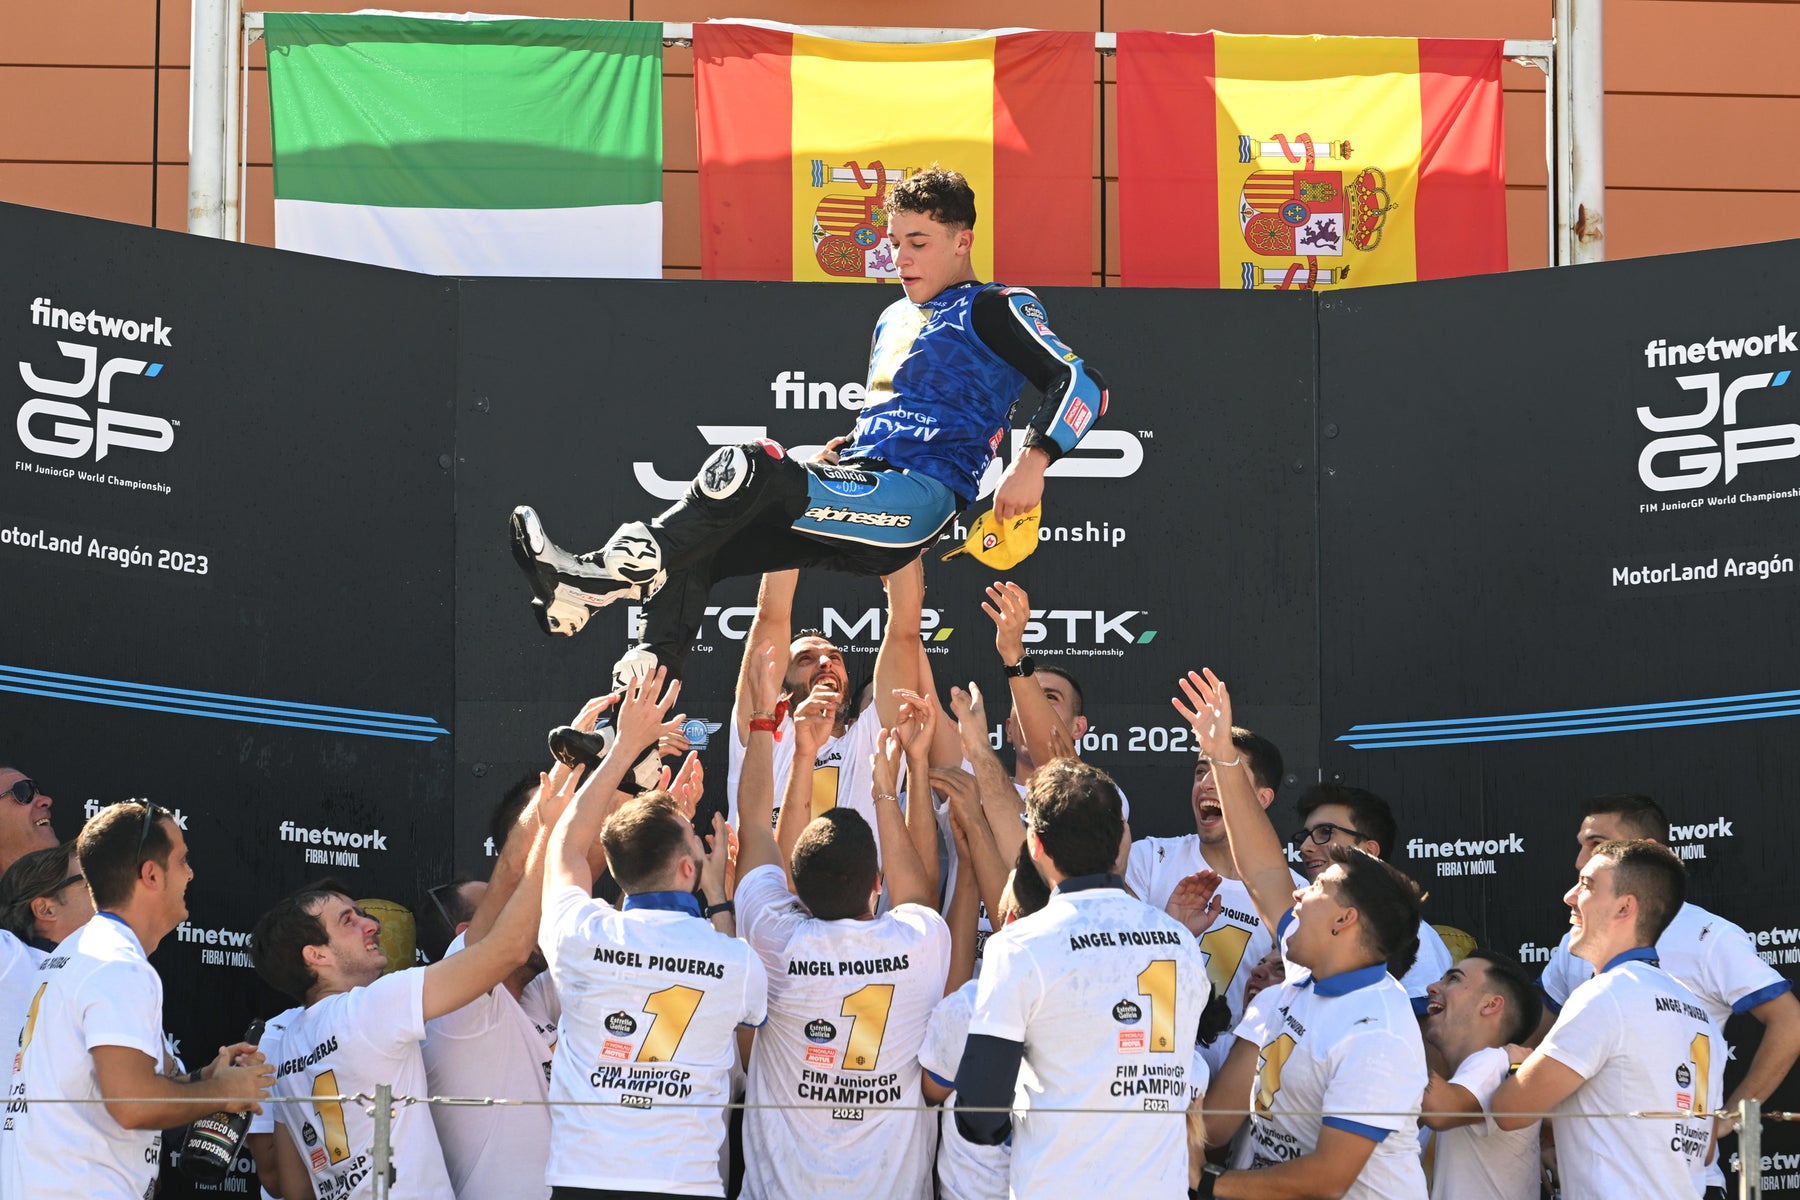 ANGEL PIQUERAS SEALS FIM JUNIORGP CHAMPIONSHIP IN STYLE WITH VICTORY AT ARAGON, SPAIN